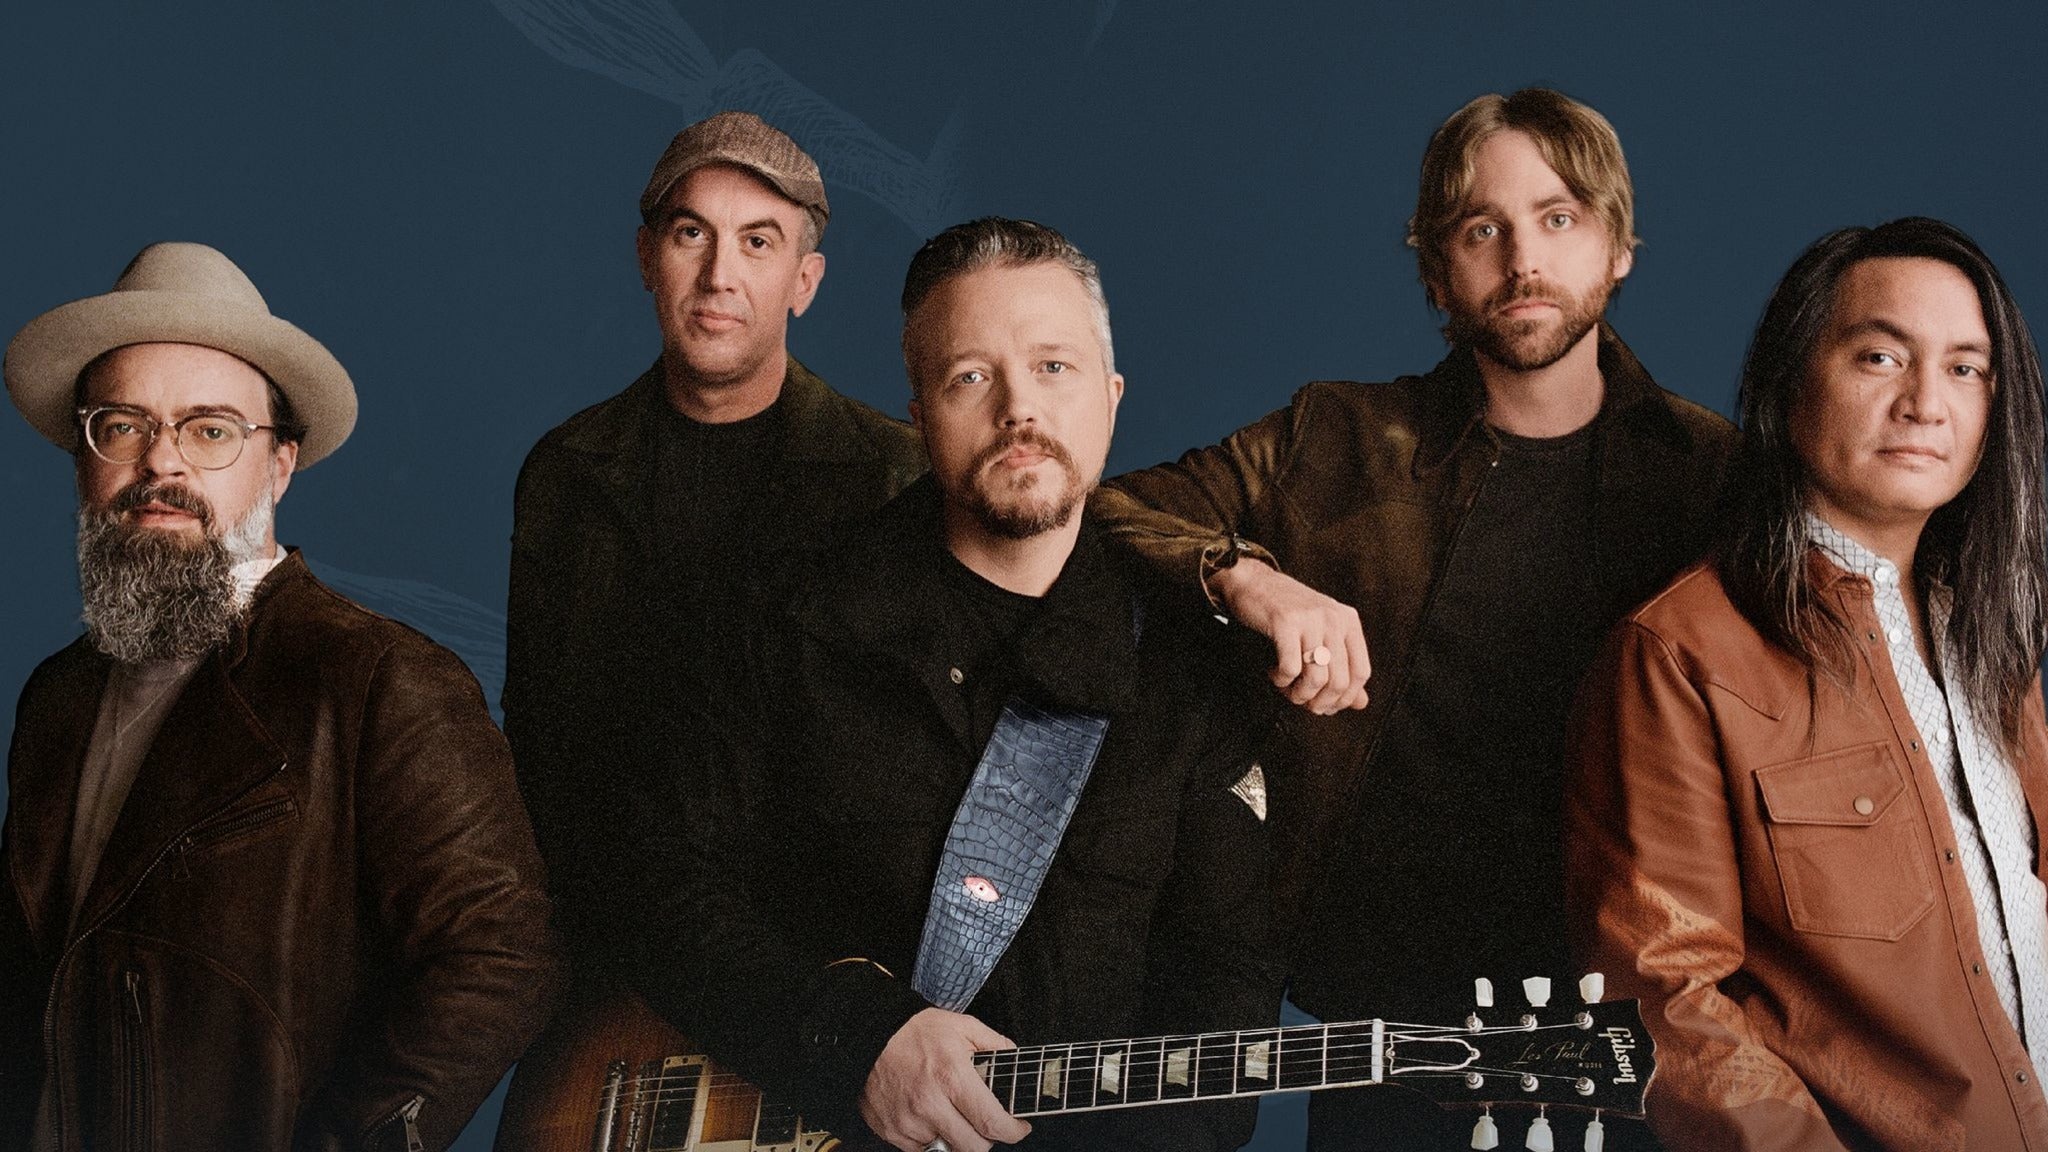 Image used with permission from Ticketmaster | Jason Isbell and the 400 Unit with special guest Allison Russell tickets